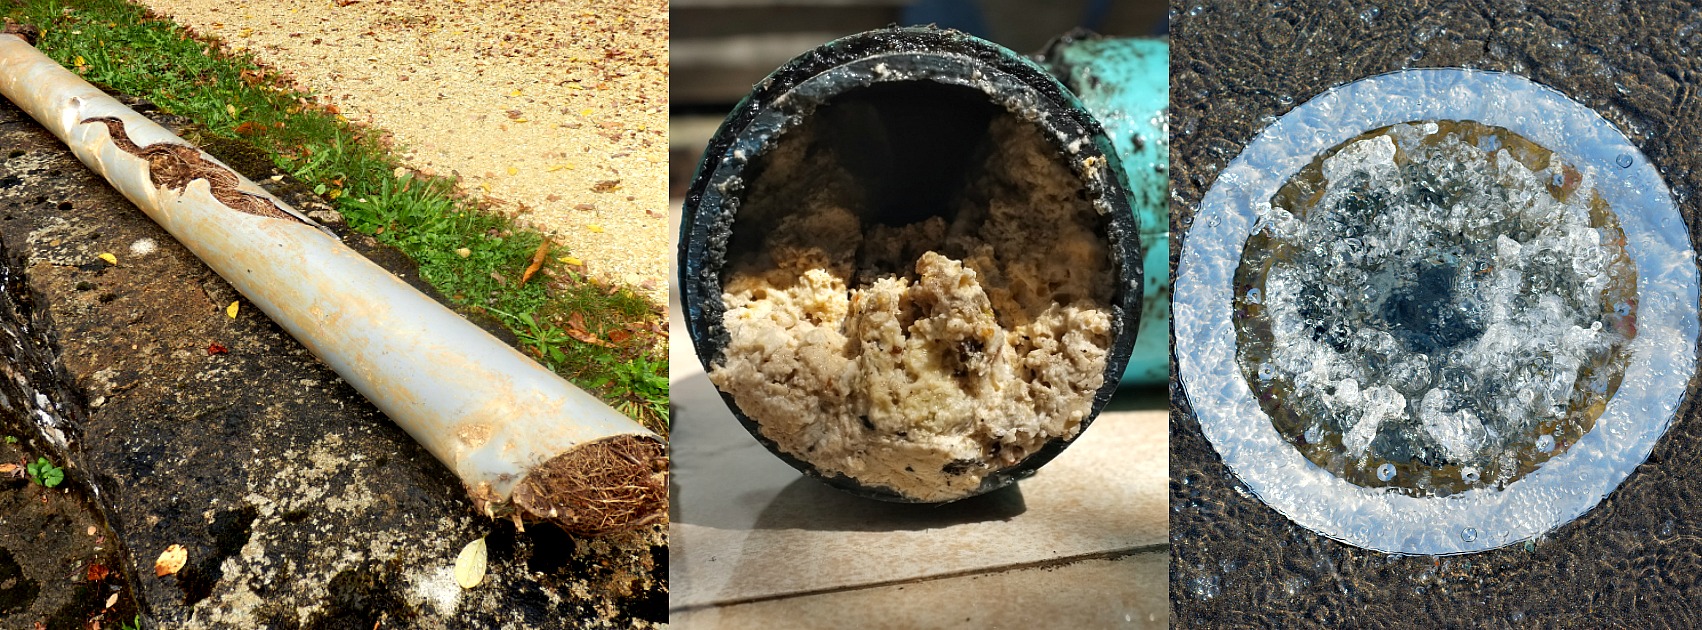 https://www.rodgersplumbing.com/wp-content/uploads/2017/06/3-warning-signs-of-a-clogged-sewer-line.jpg